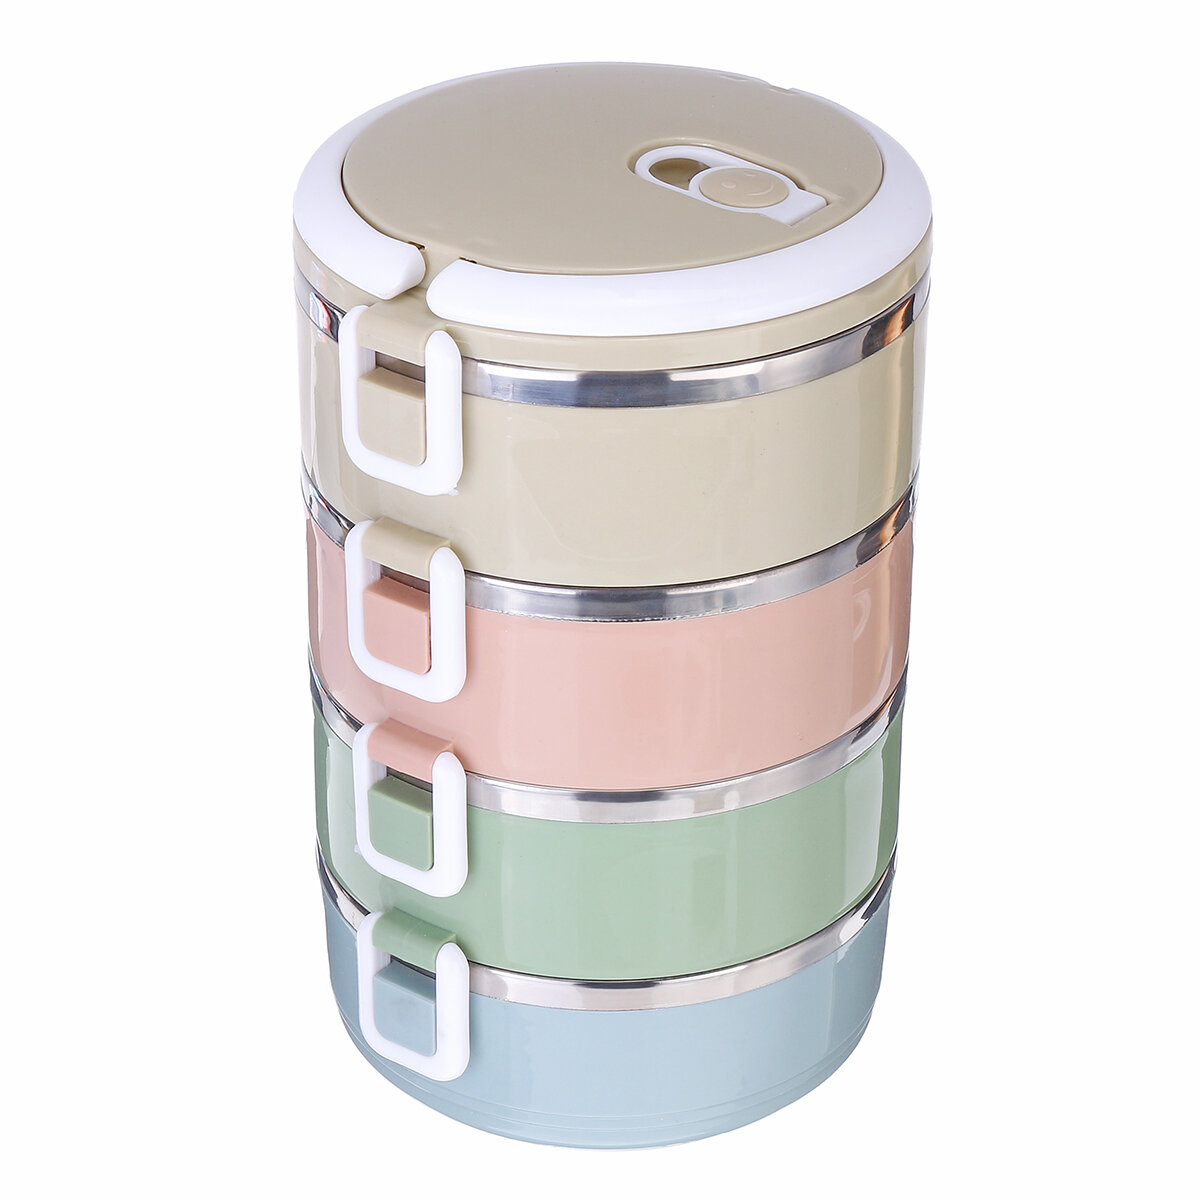 

2/3/4 Layers Stainless Steel Lunch Box Square Buckle Thermal Insulated Lunch Box Bento Food Container For School Office